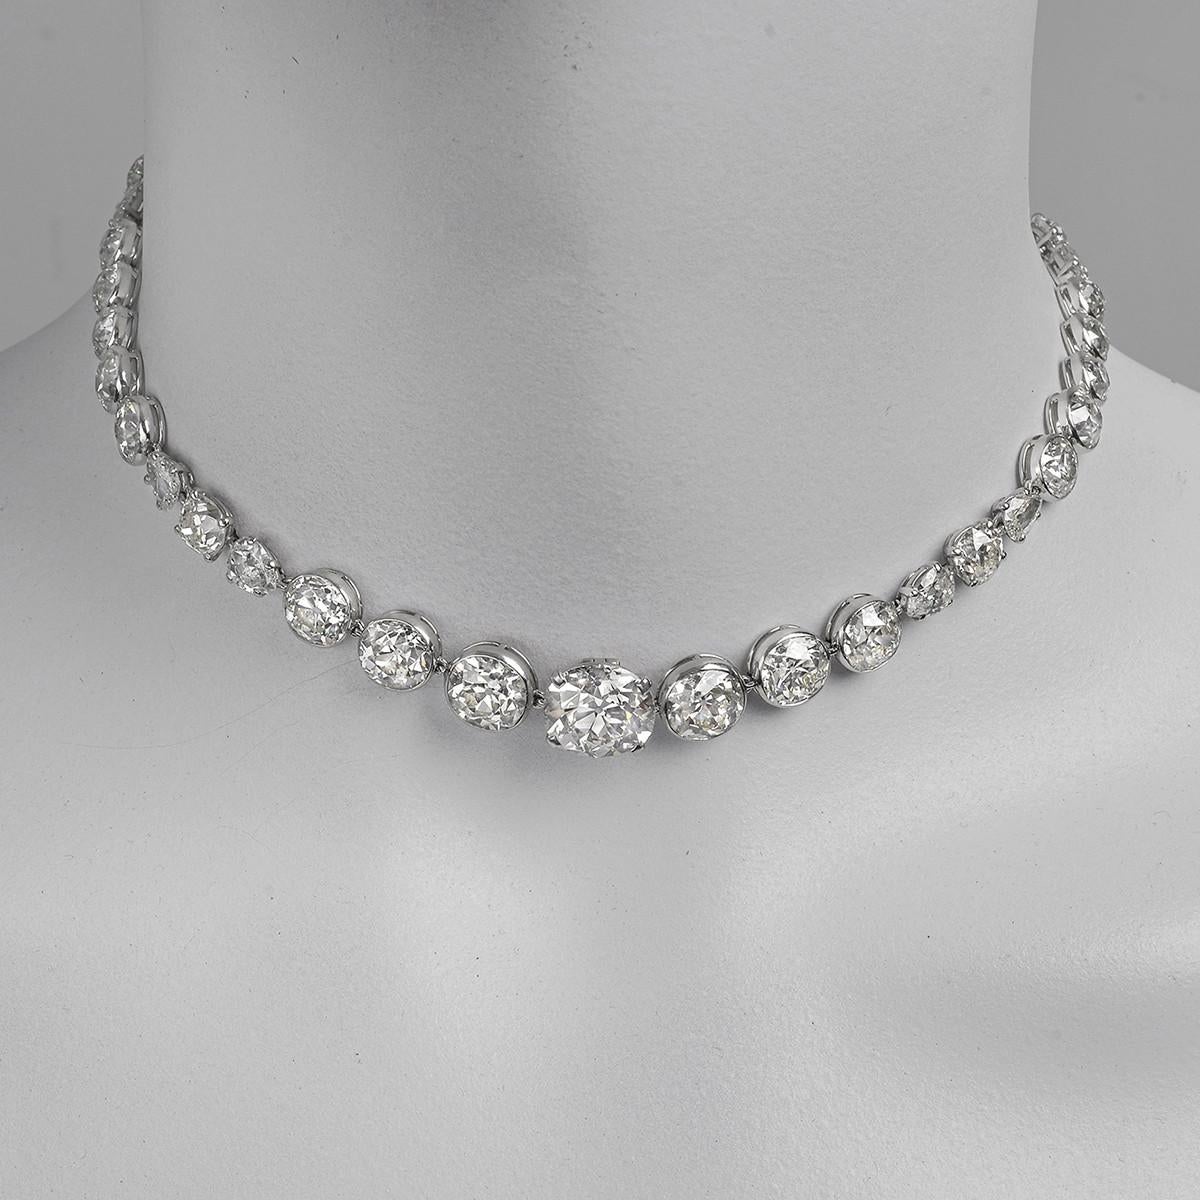 Mixed-cut diamond rivière necklace, composed as a graduated chain of prong-set cushion, oval and pear-shaped diamonds with bezel-set circular-cut diamonds, set in platinum.

44 diamonds weighing ~40.00 total carats
Central diamond weighing ~8.10